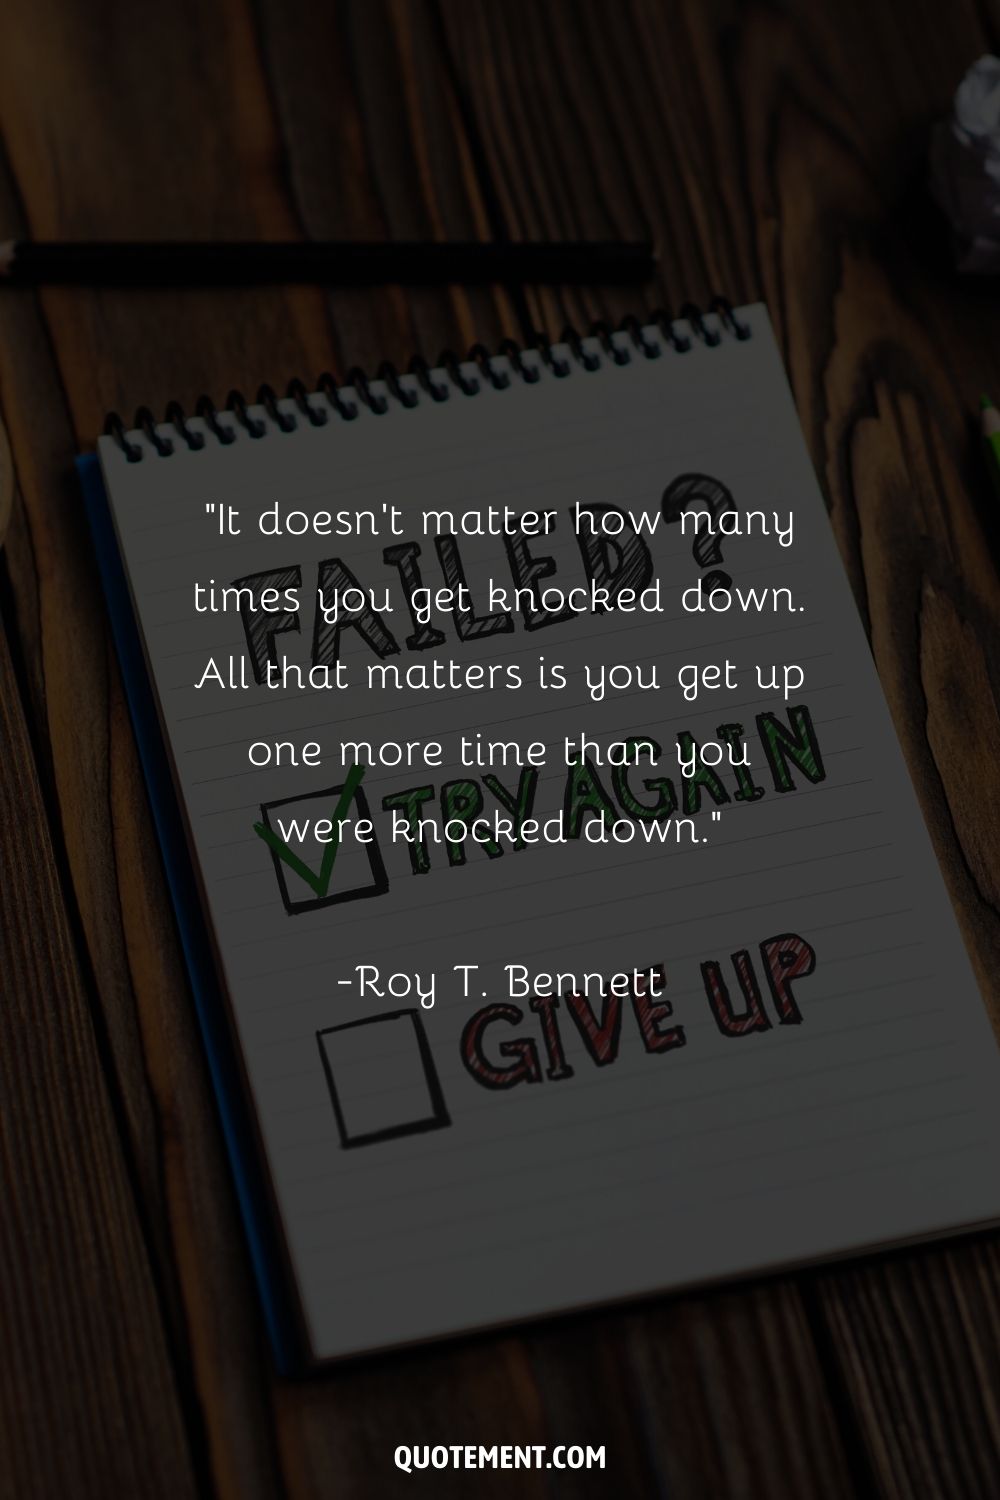 “It doesn’t matter how many times you get knocked down. All that matters is you get up one more time than you were knocked down.” ― Roy T. Bennett